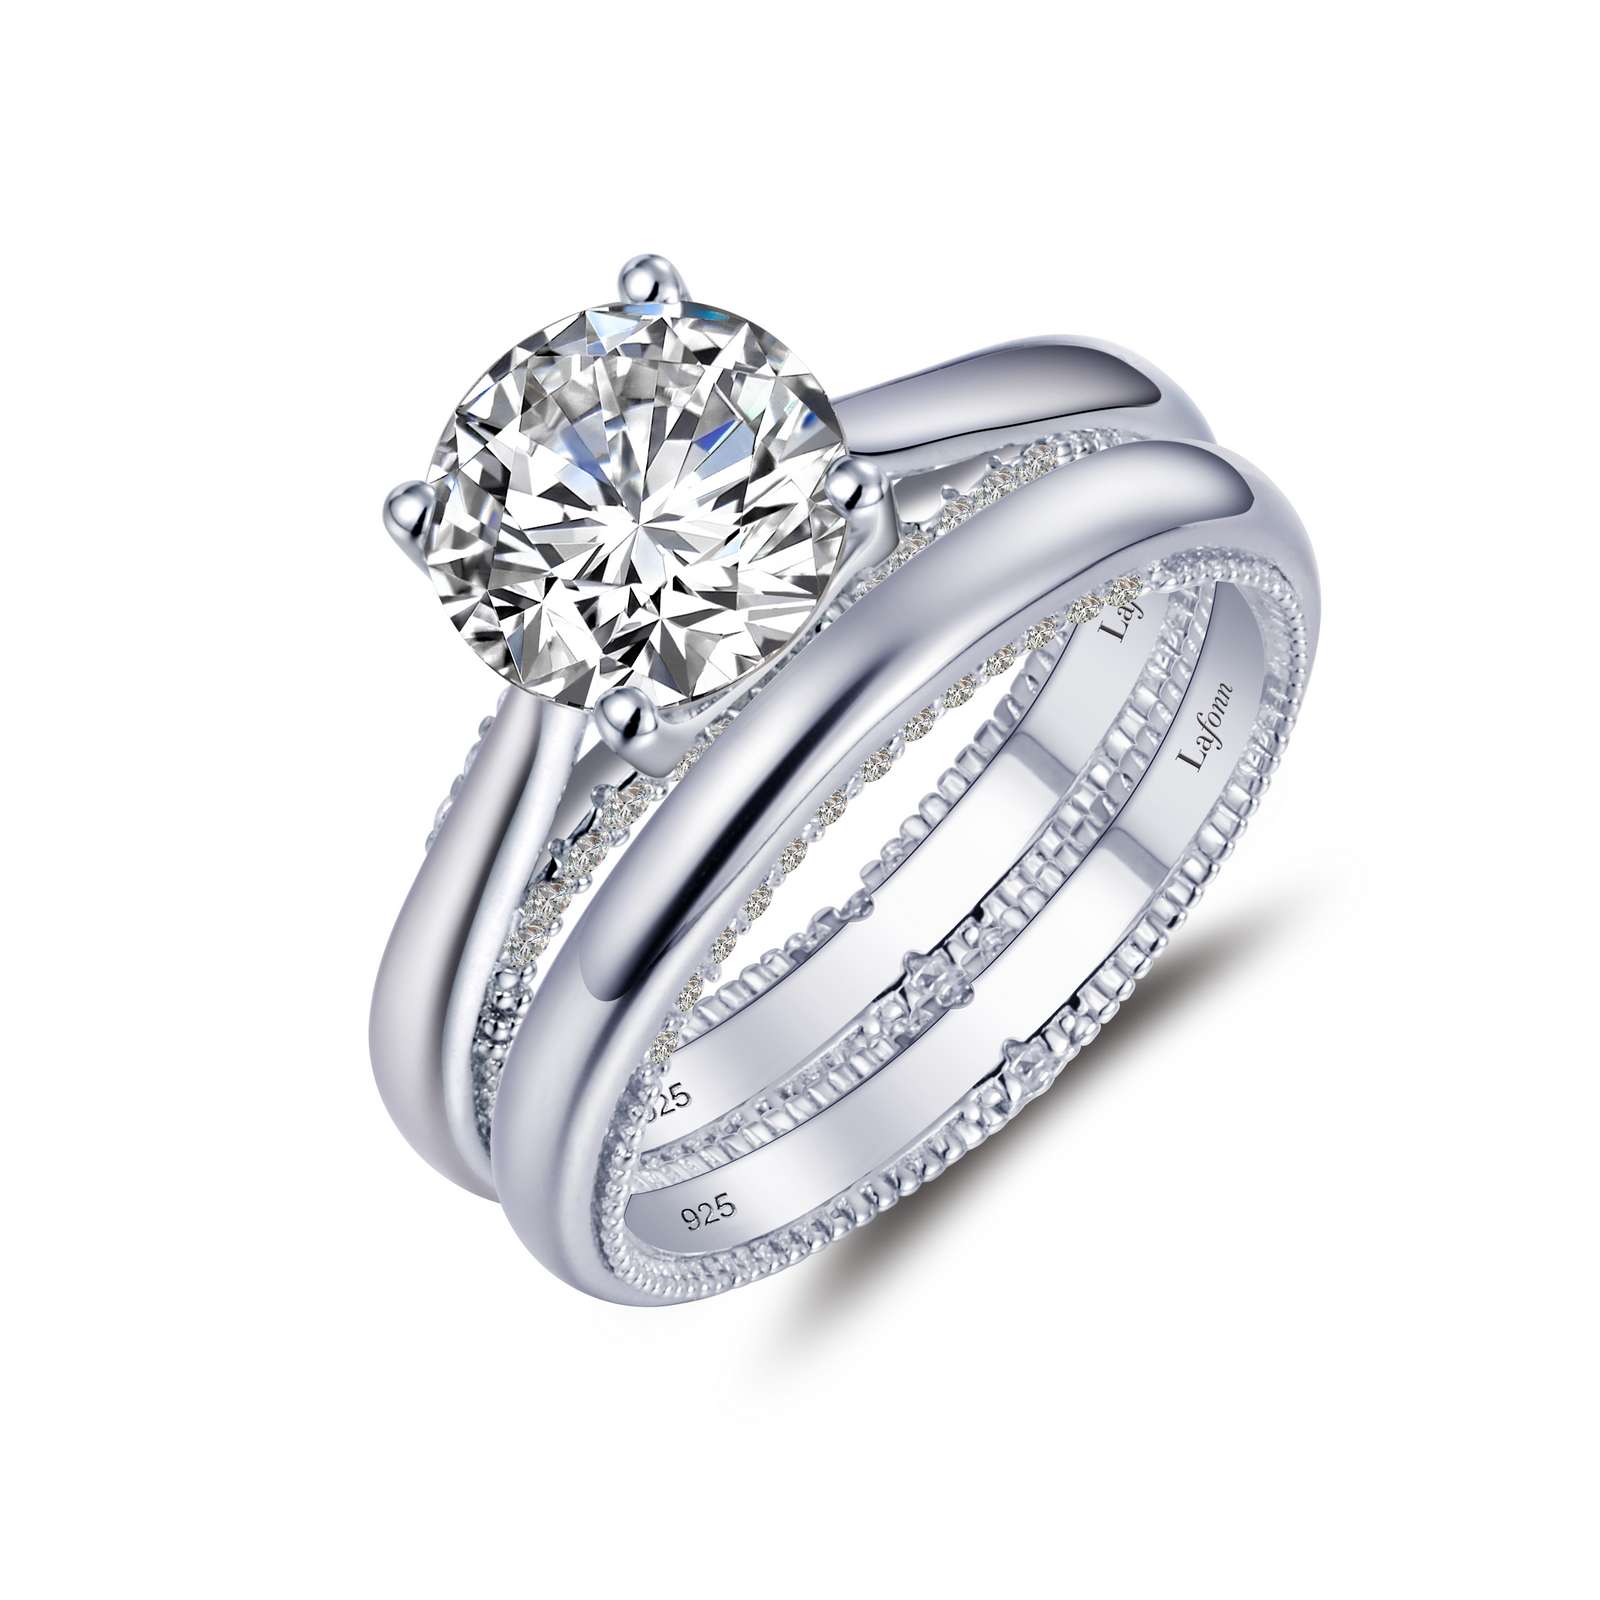 Classic Simulated Diamond Platinum Bonded Ring Griner Jewelry Co. Moultrie, GA